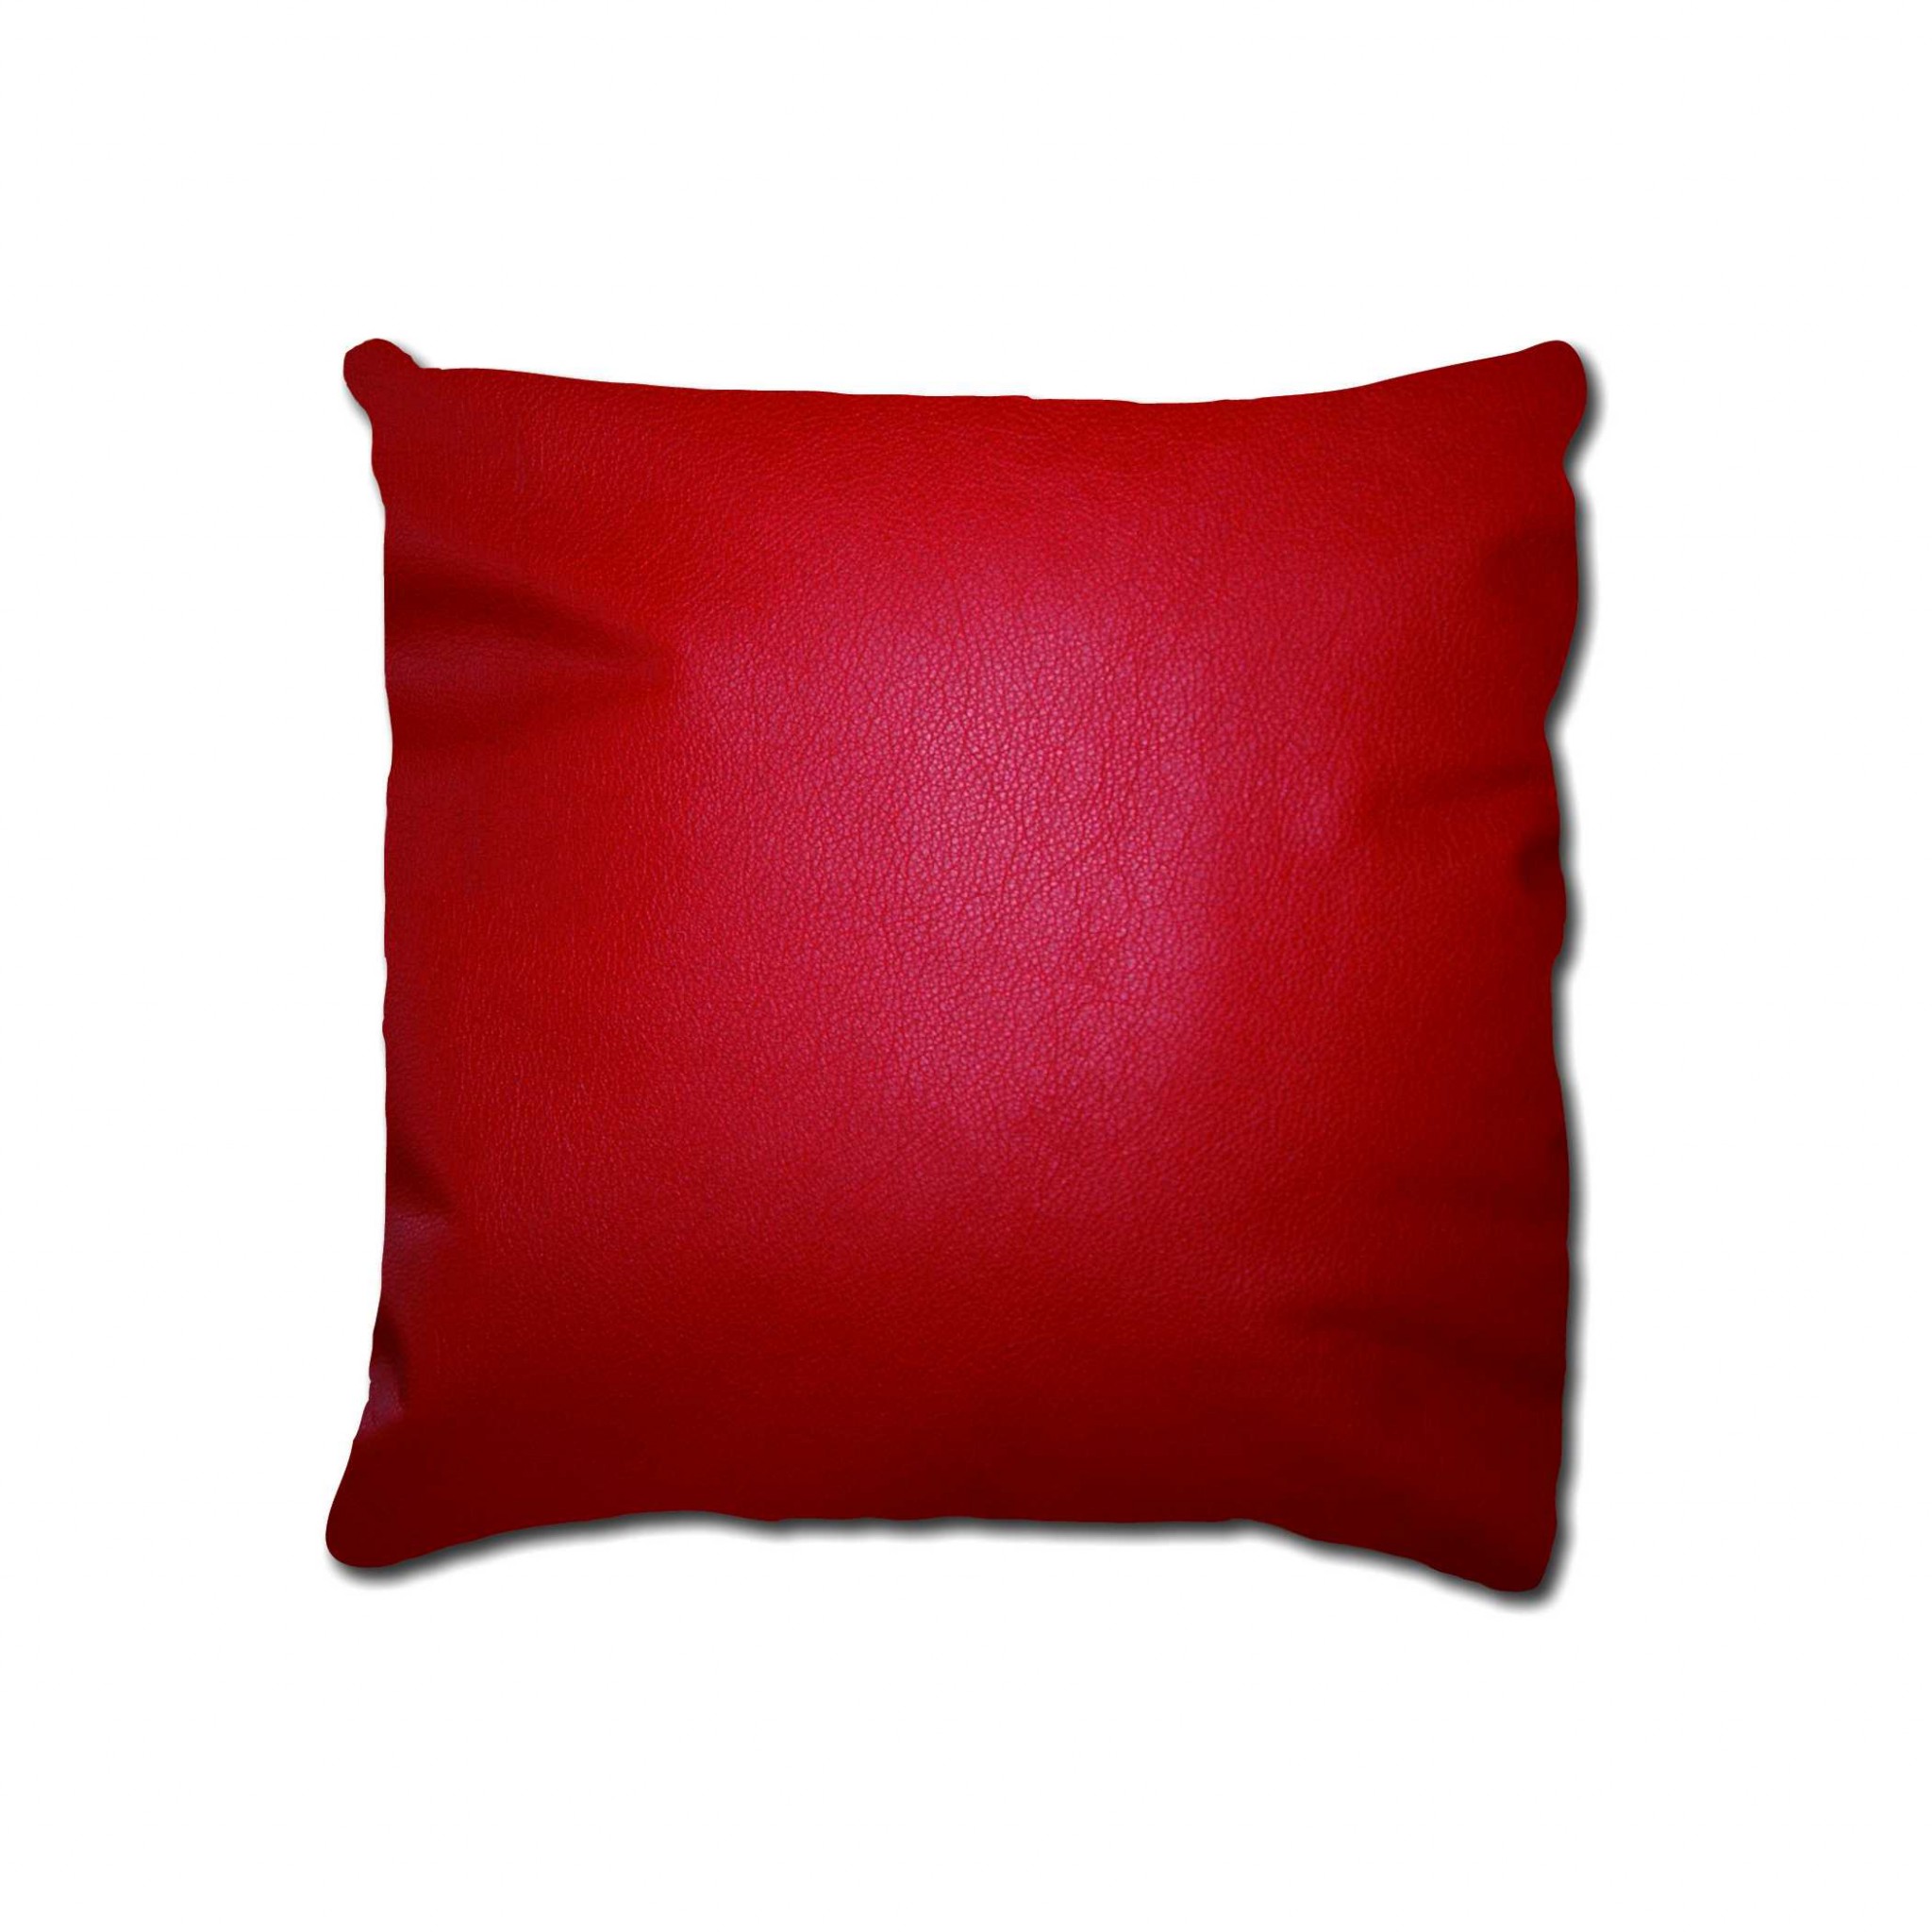 16" x 16" x 5" Red Cowhide Leather - Pillow